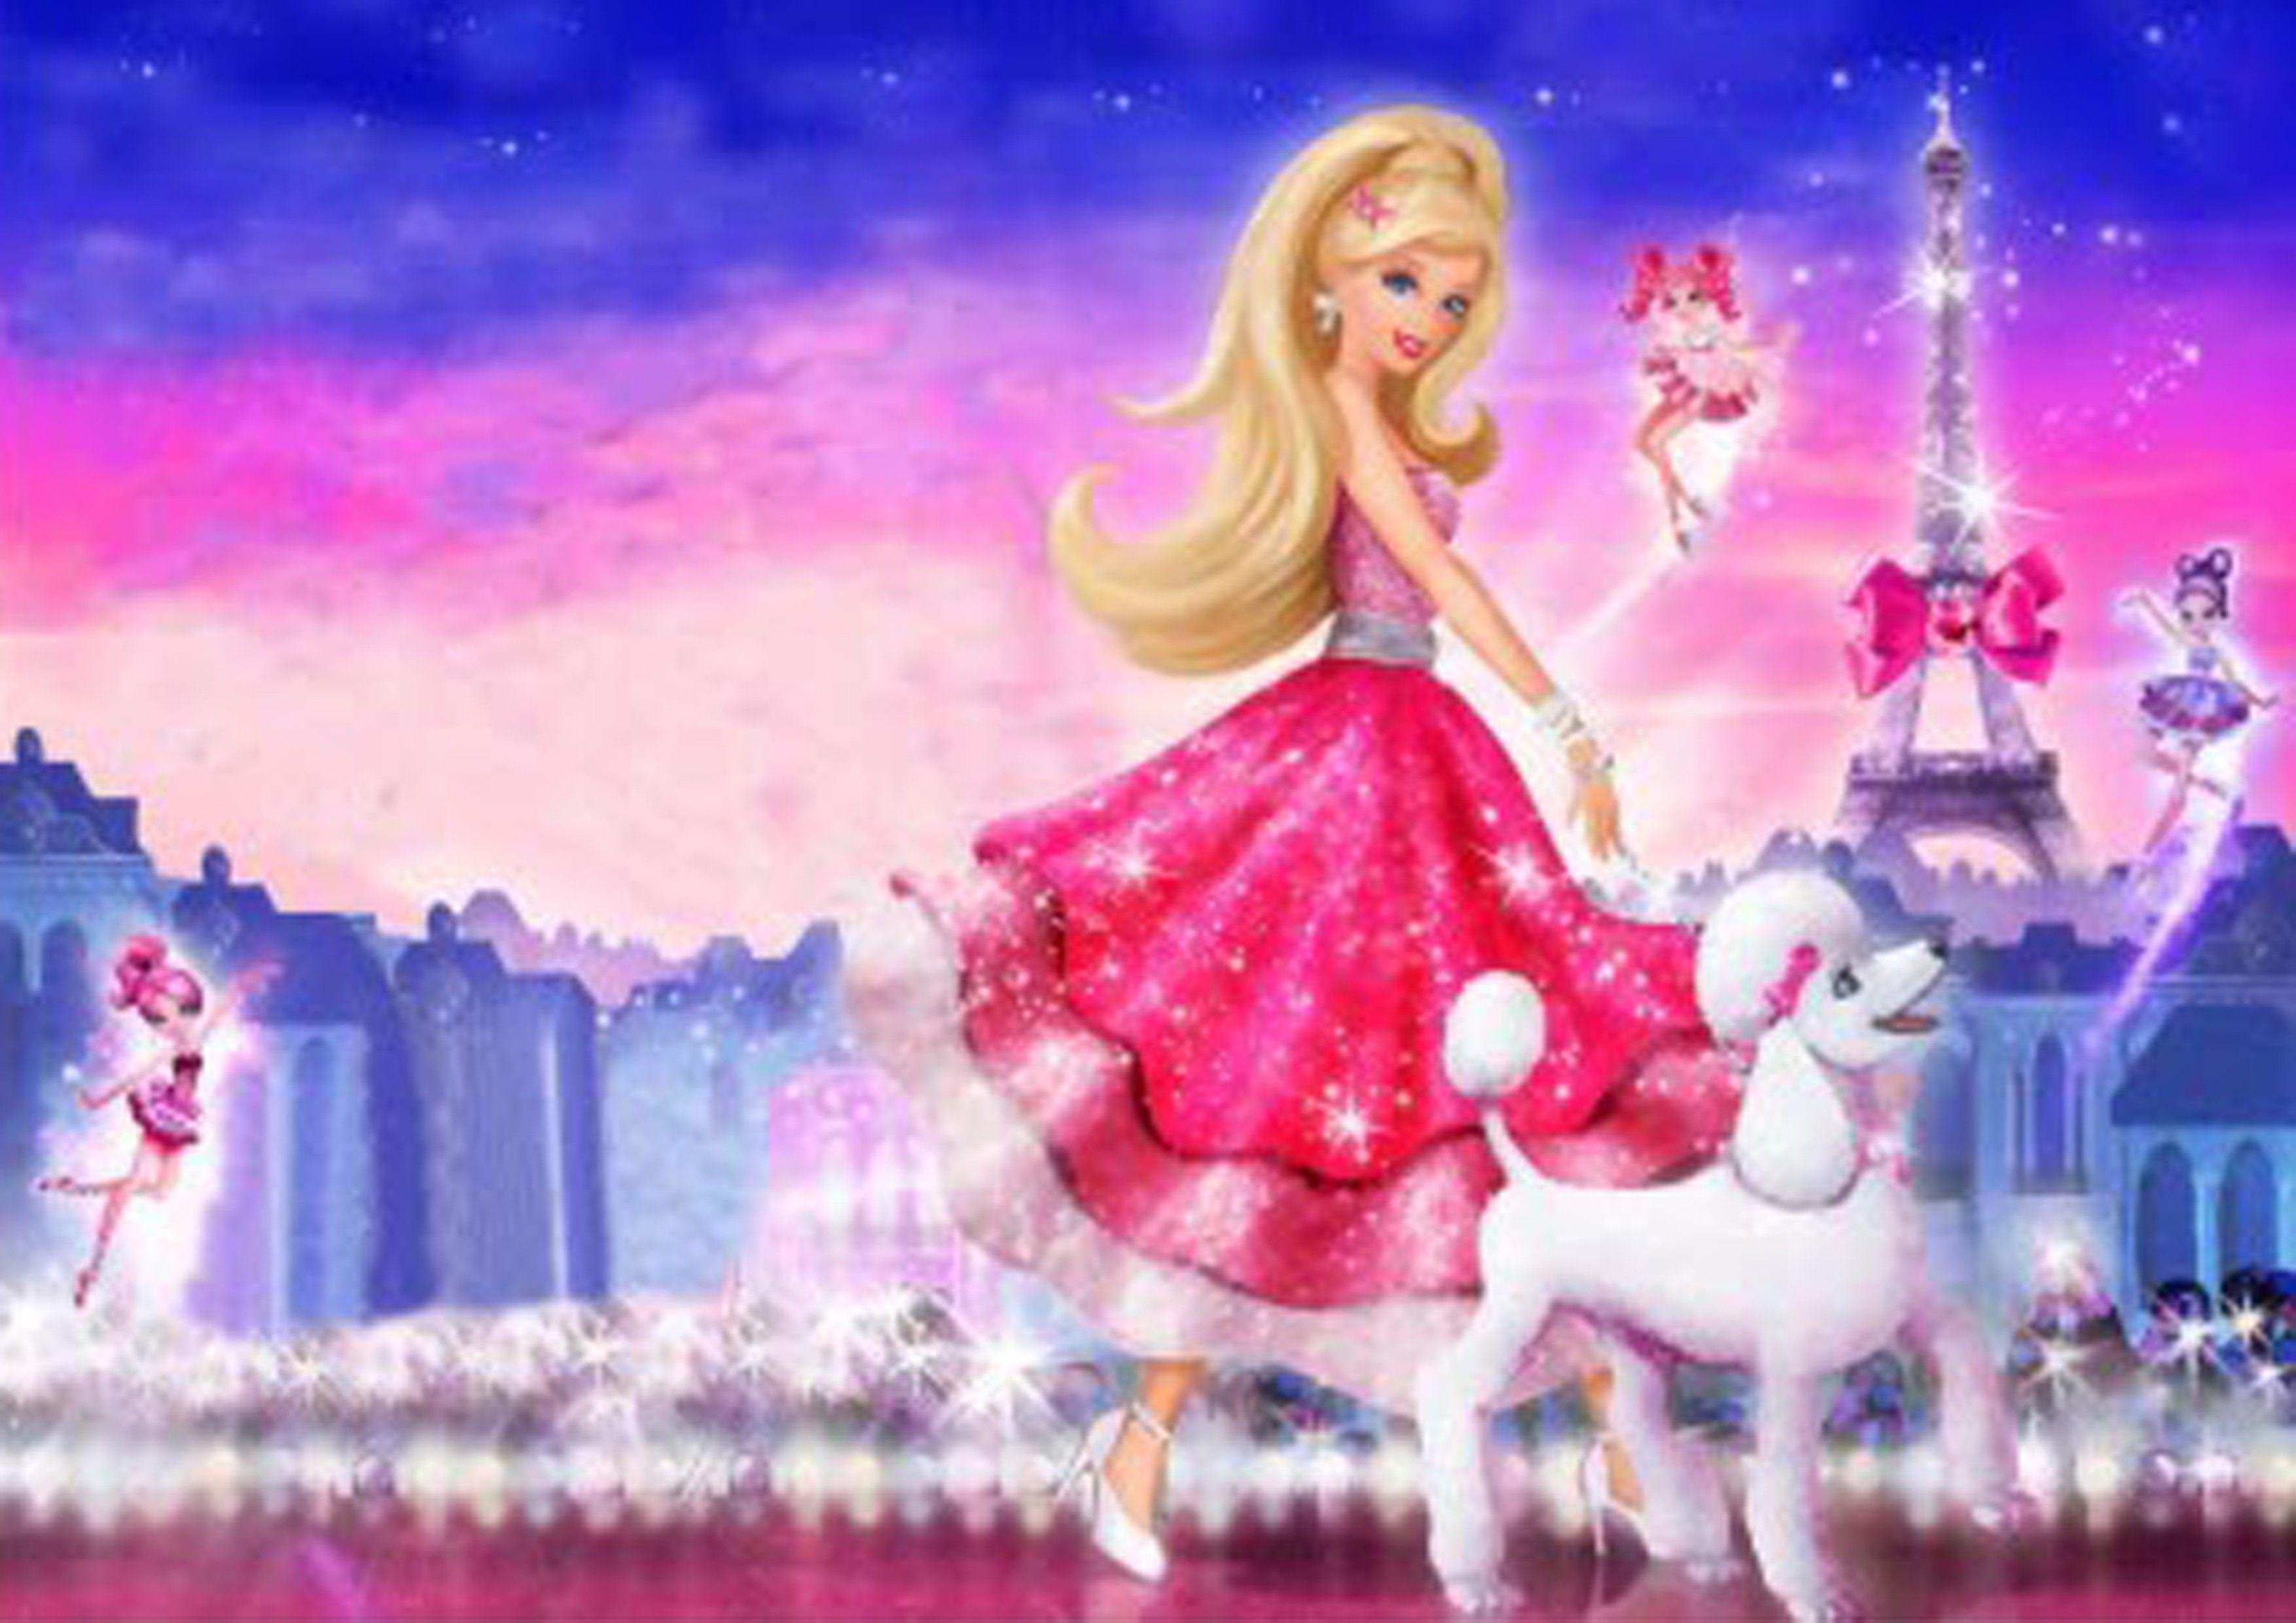 Barbie Wallpapers Top Free Barbie Backgrounds Wallpaperaccess